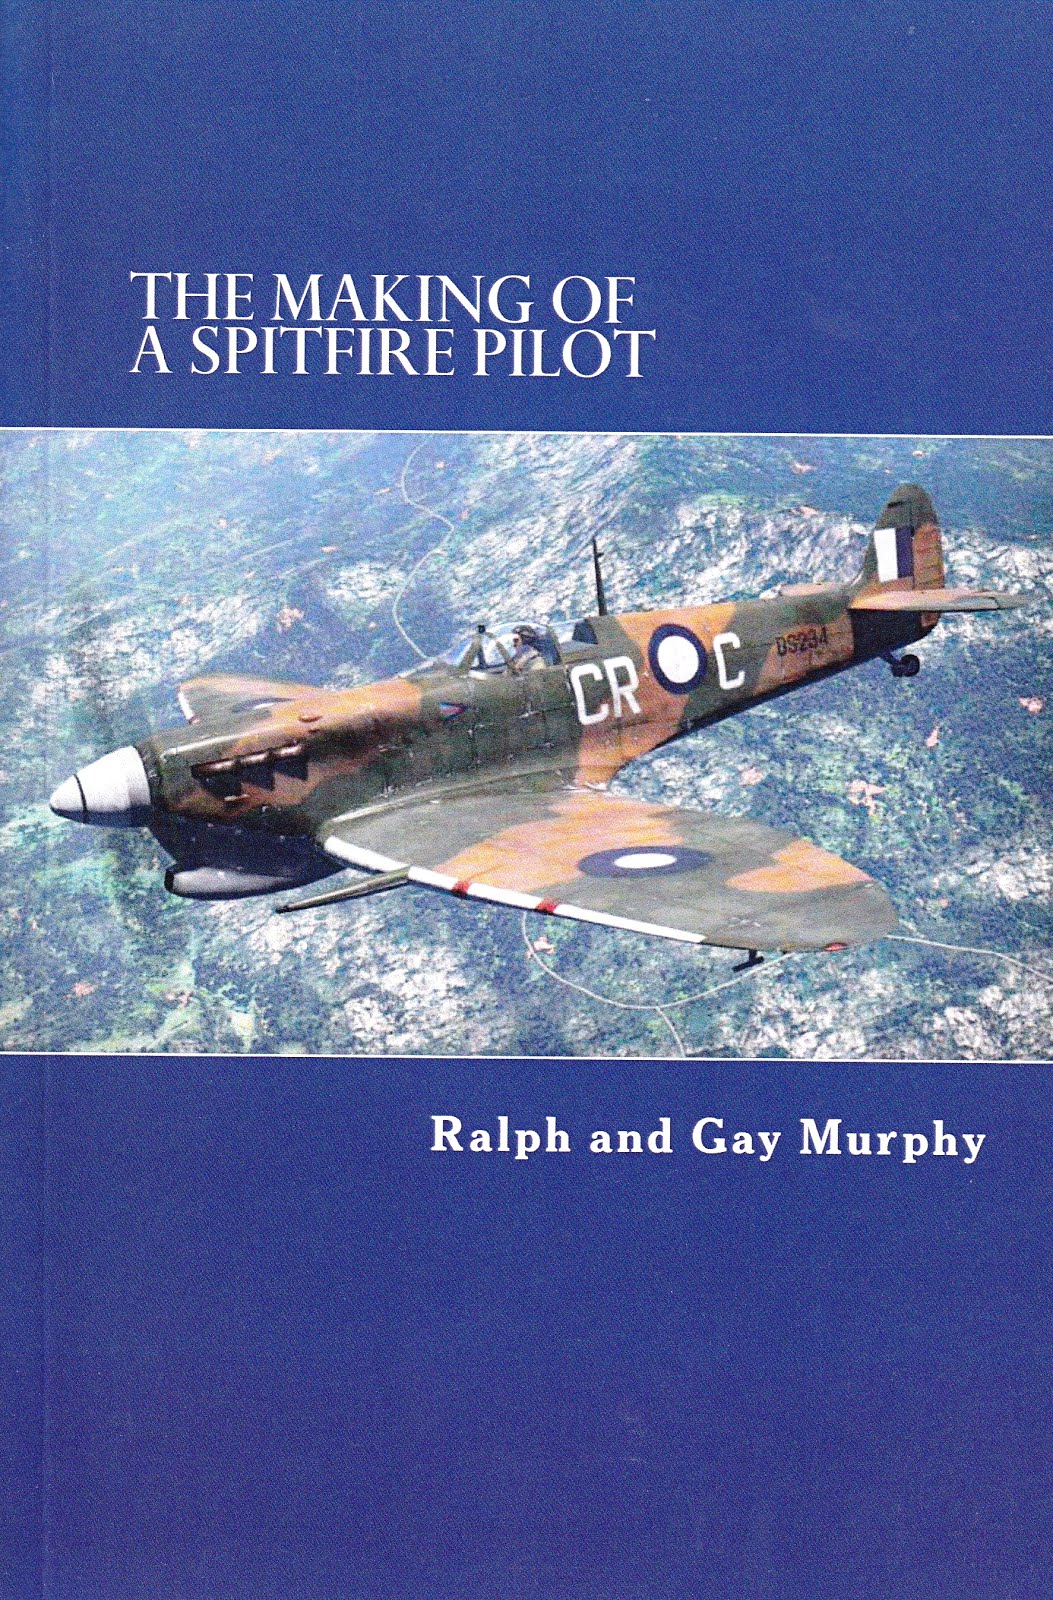 The Making of a Spitfire Pilot